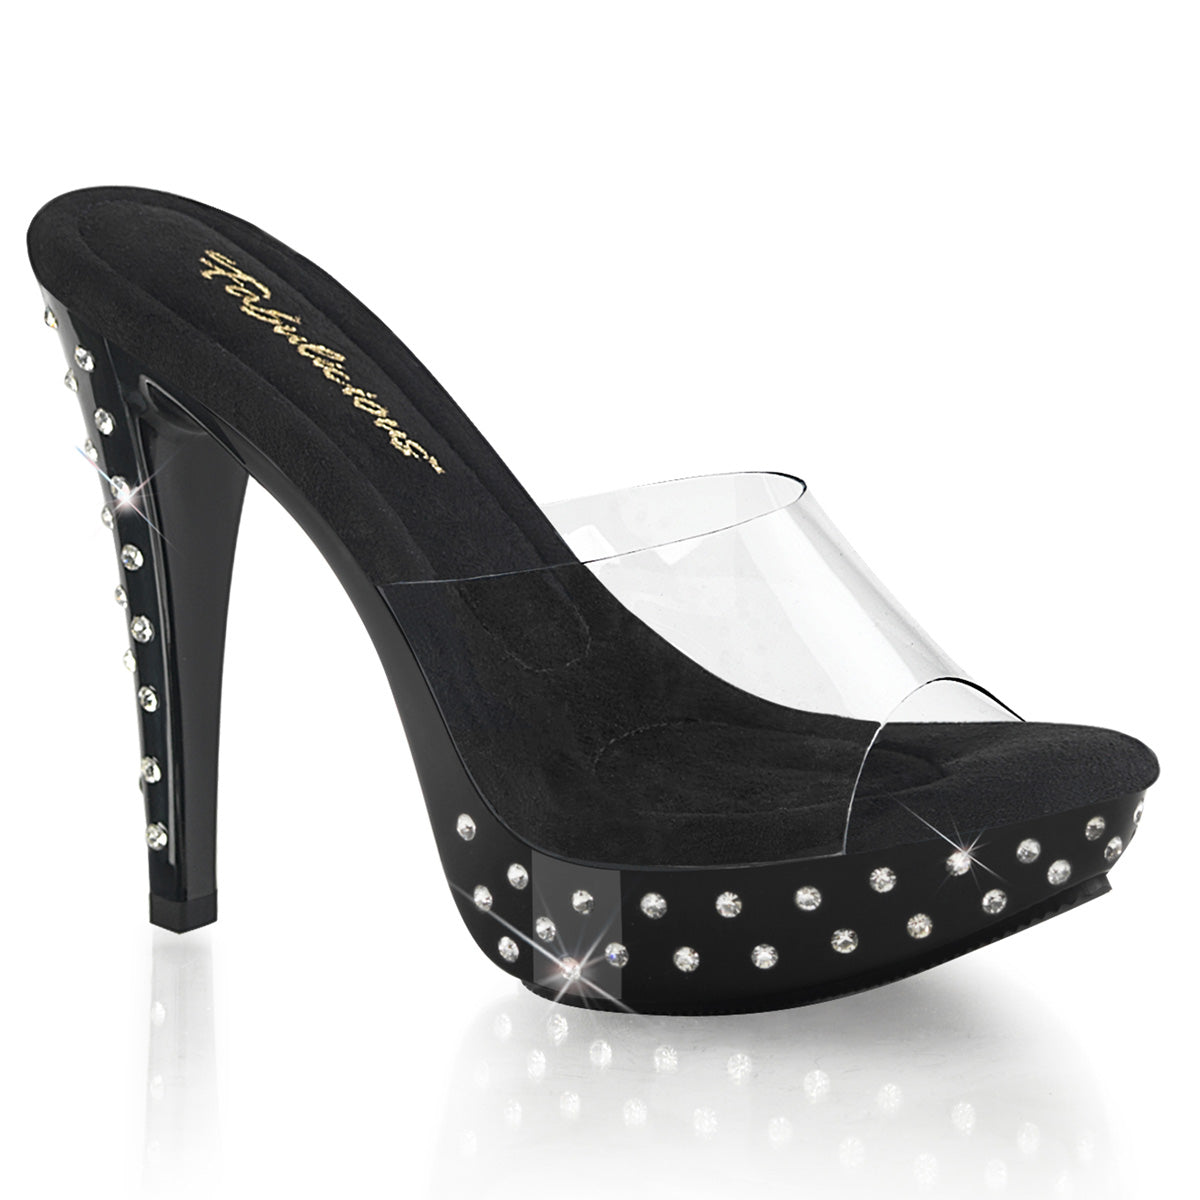 COCKTAIL-501SDT Studded Mules Heels